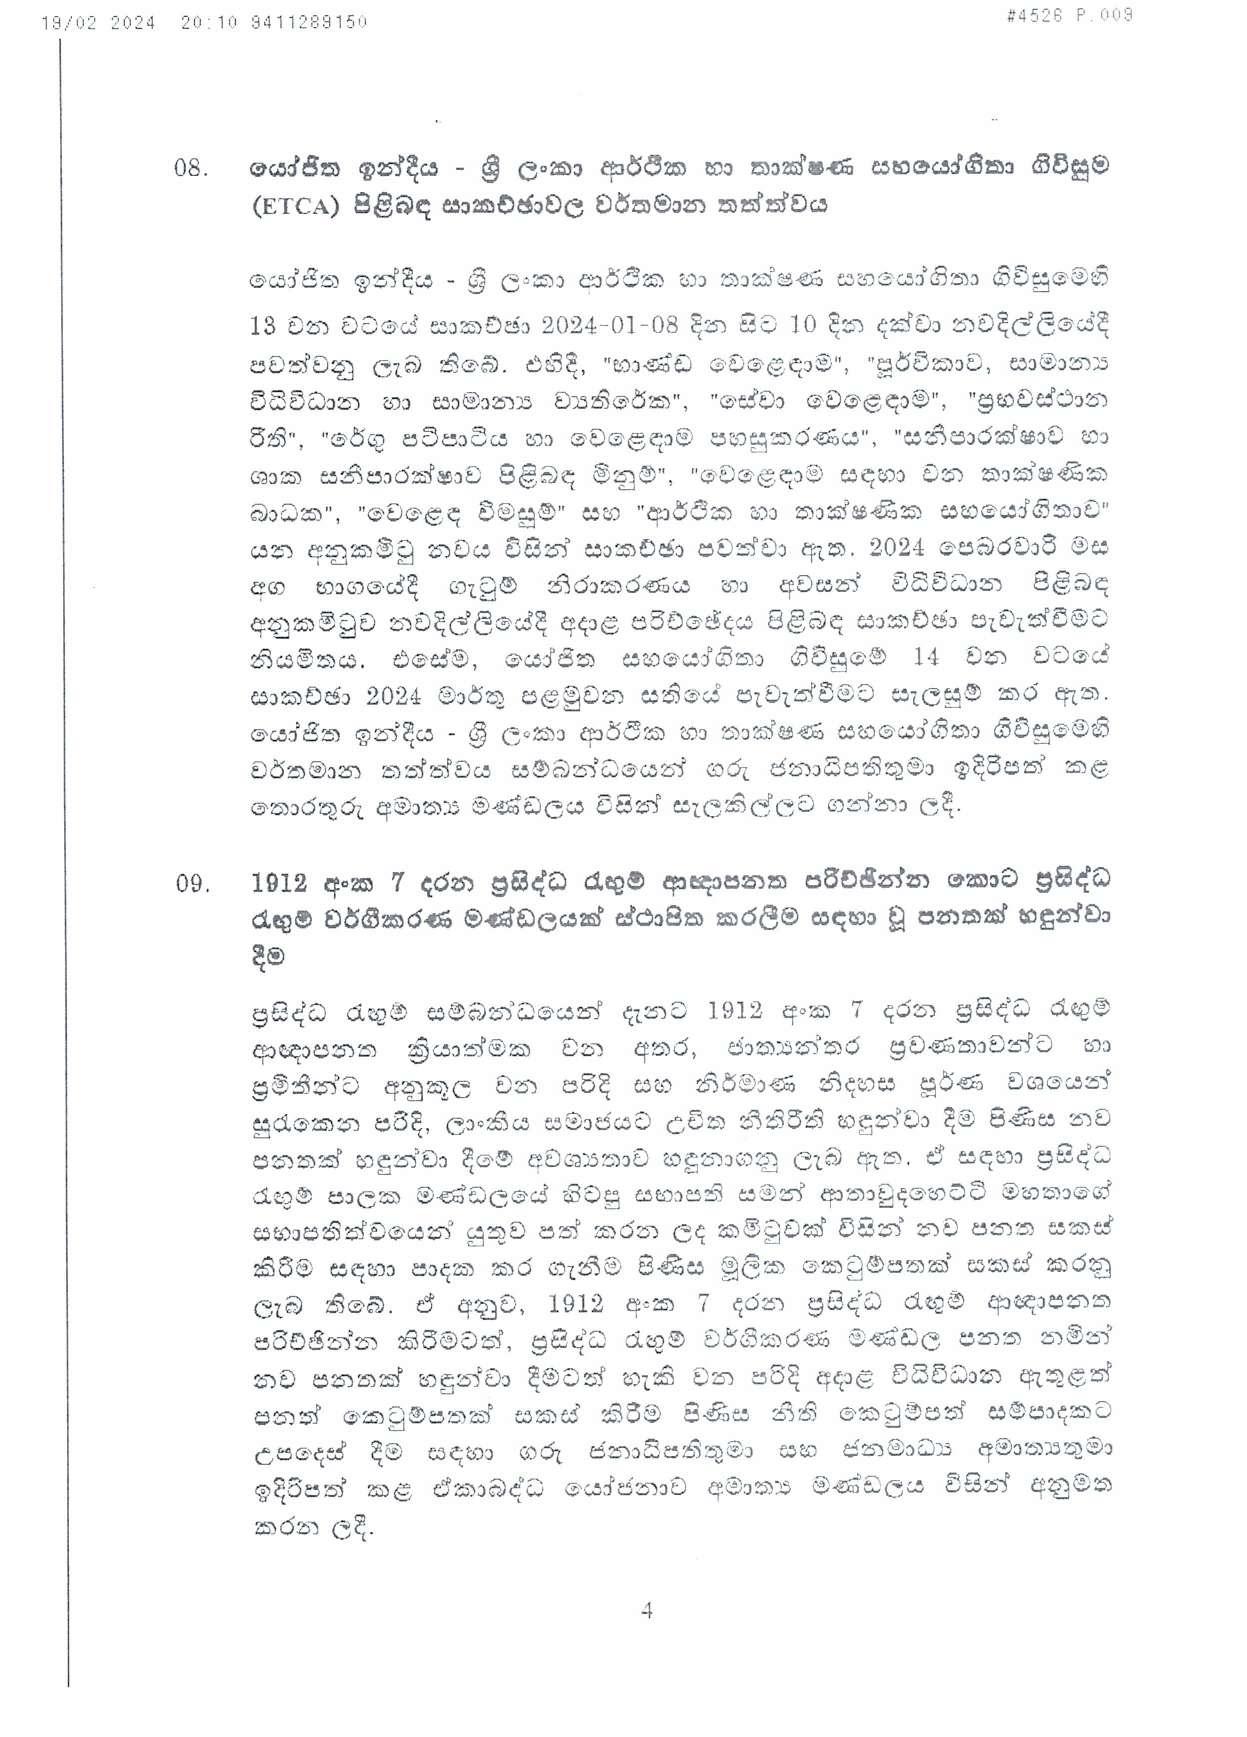 Cabinet Decisions on 19.02.2024 page 004